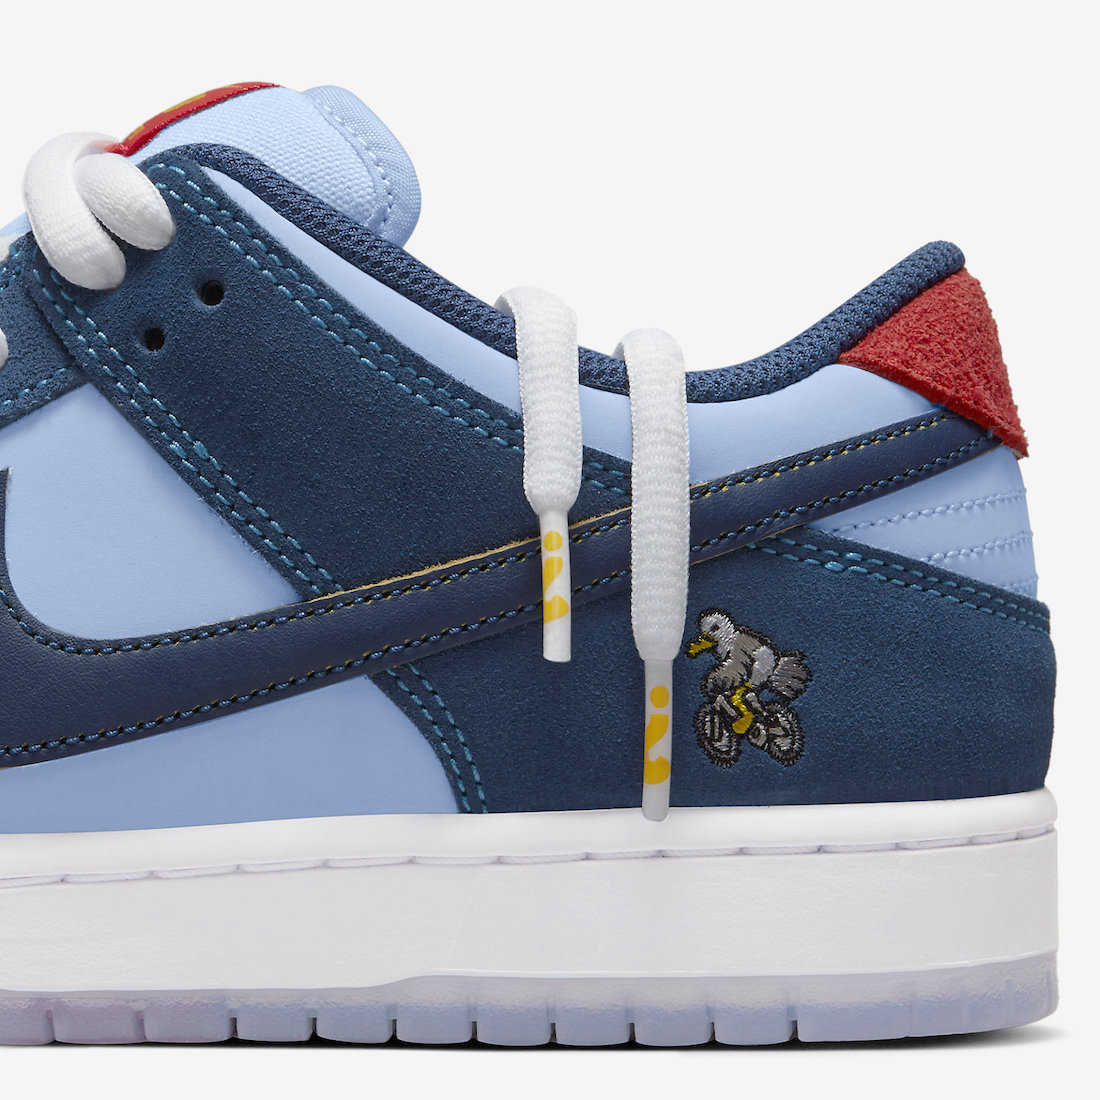 Why So Sad Nike SB Dunk Low DX5549-400 Release Date